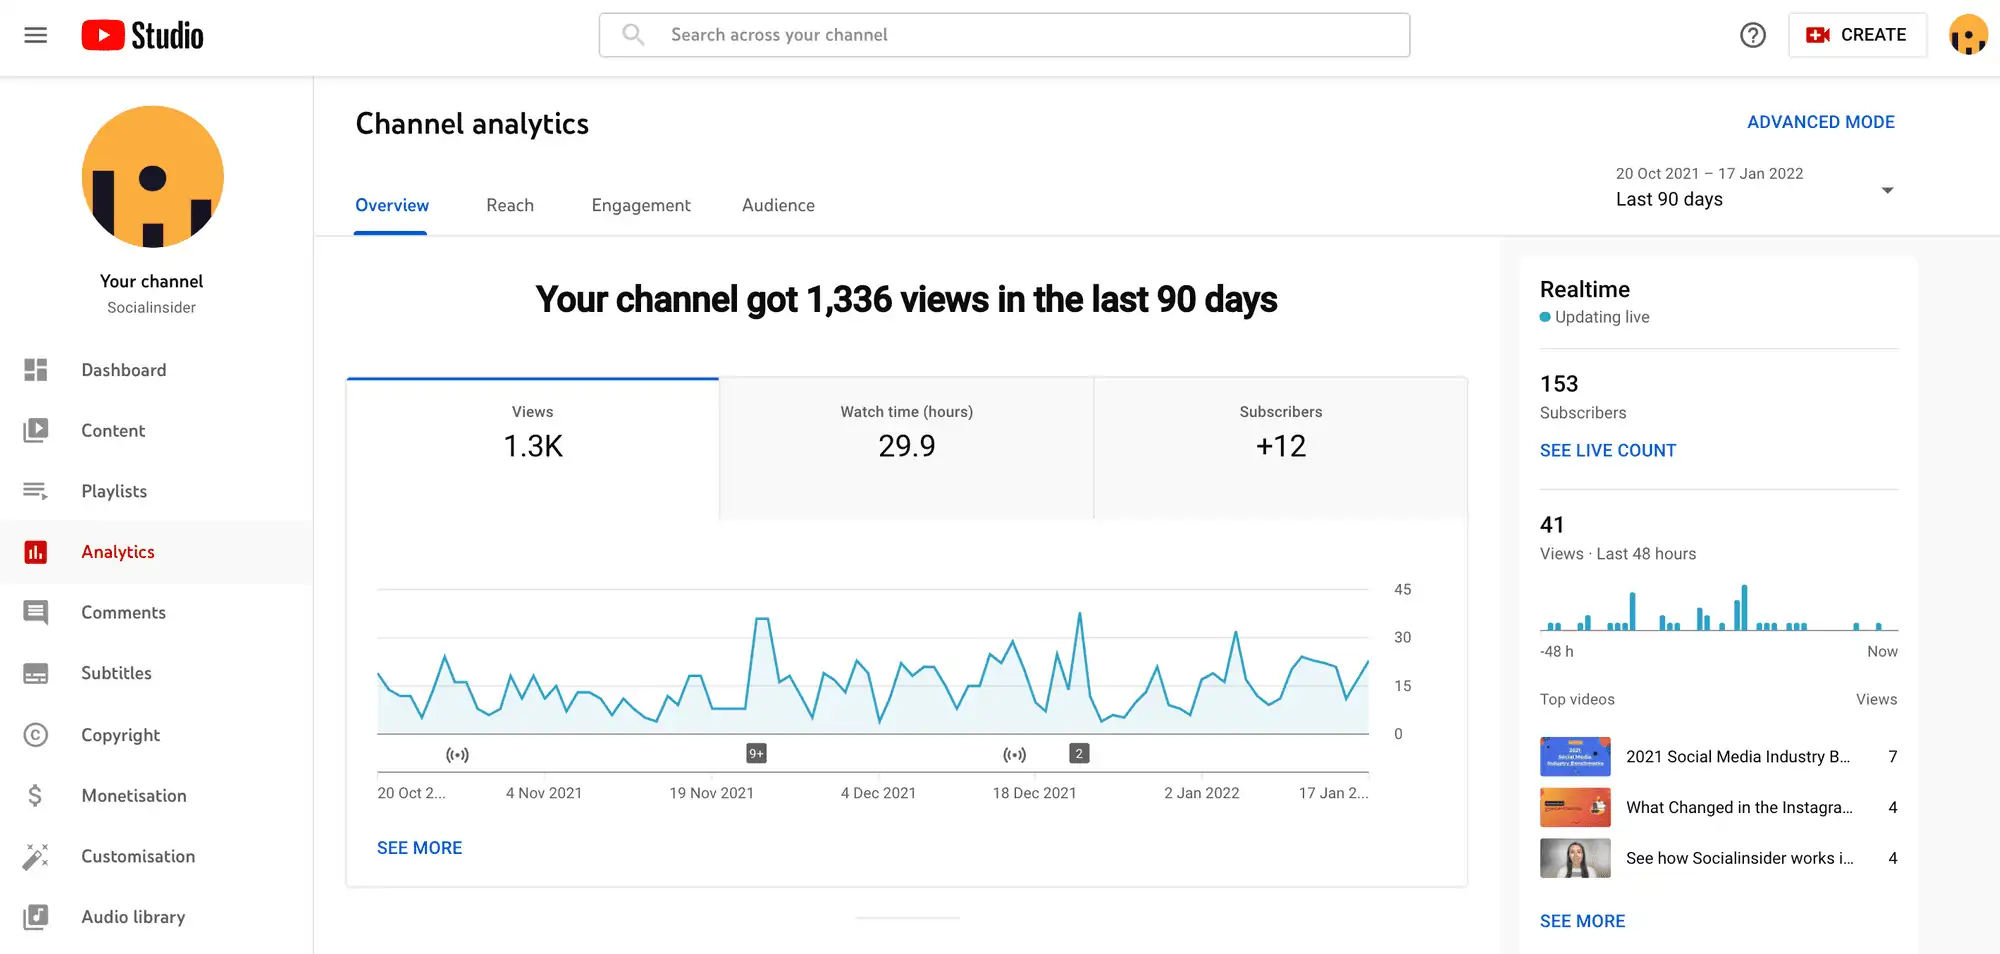 a photo showing the overviewing section of the channel analytics window of youtube